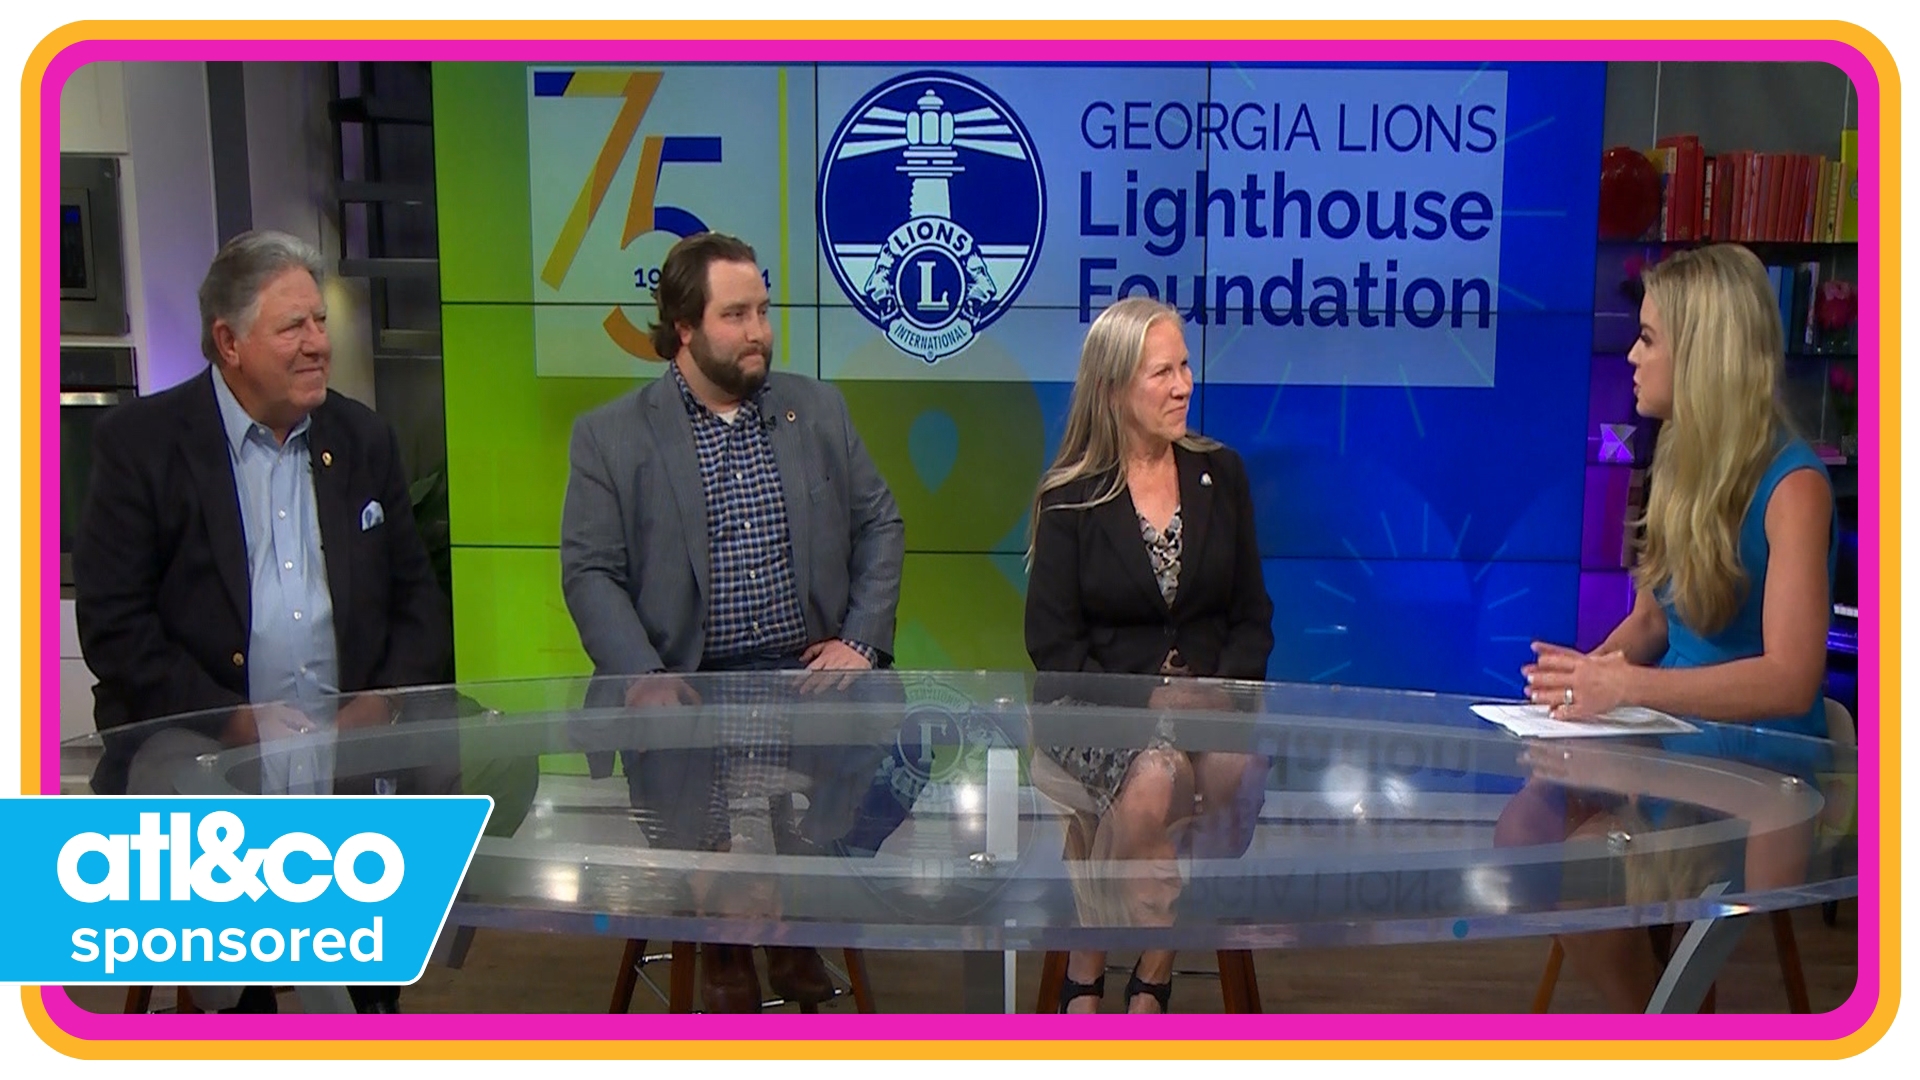 Celebrate 75 years of the Georgia Lions Lighthouse Foundation. Get involved, donate, and learn more at LionsLighthouse.org